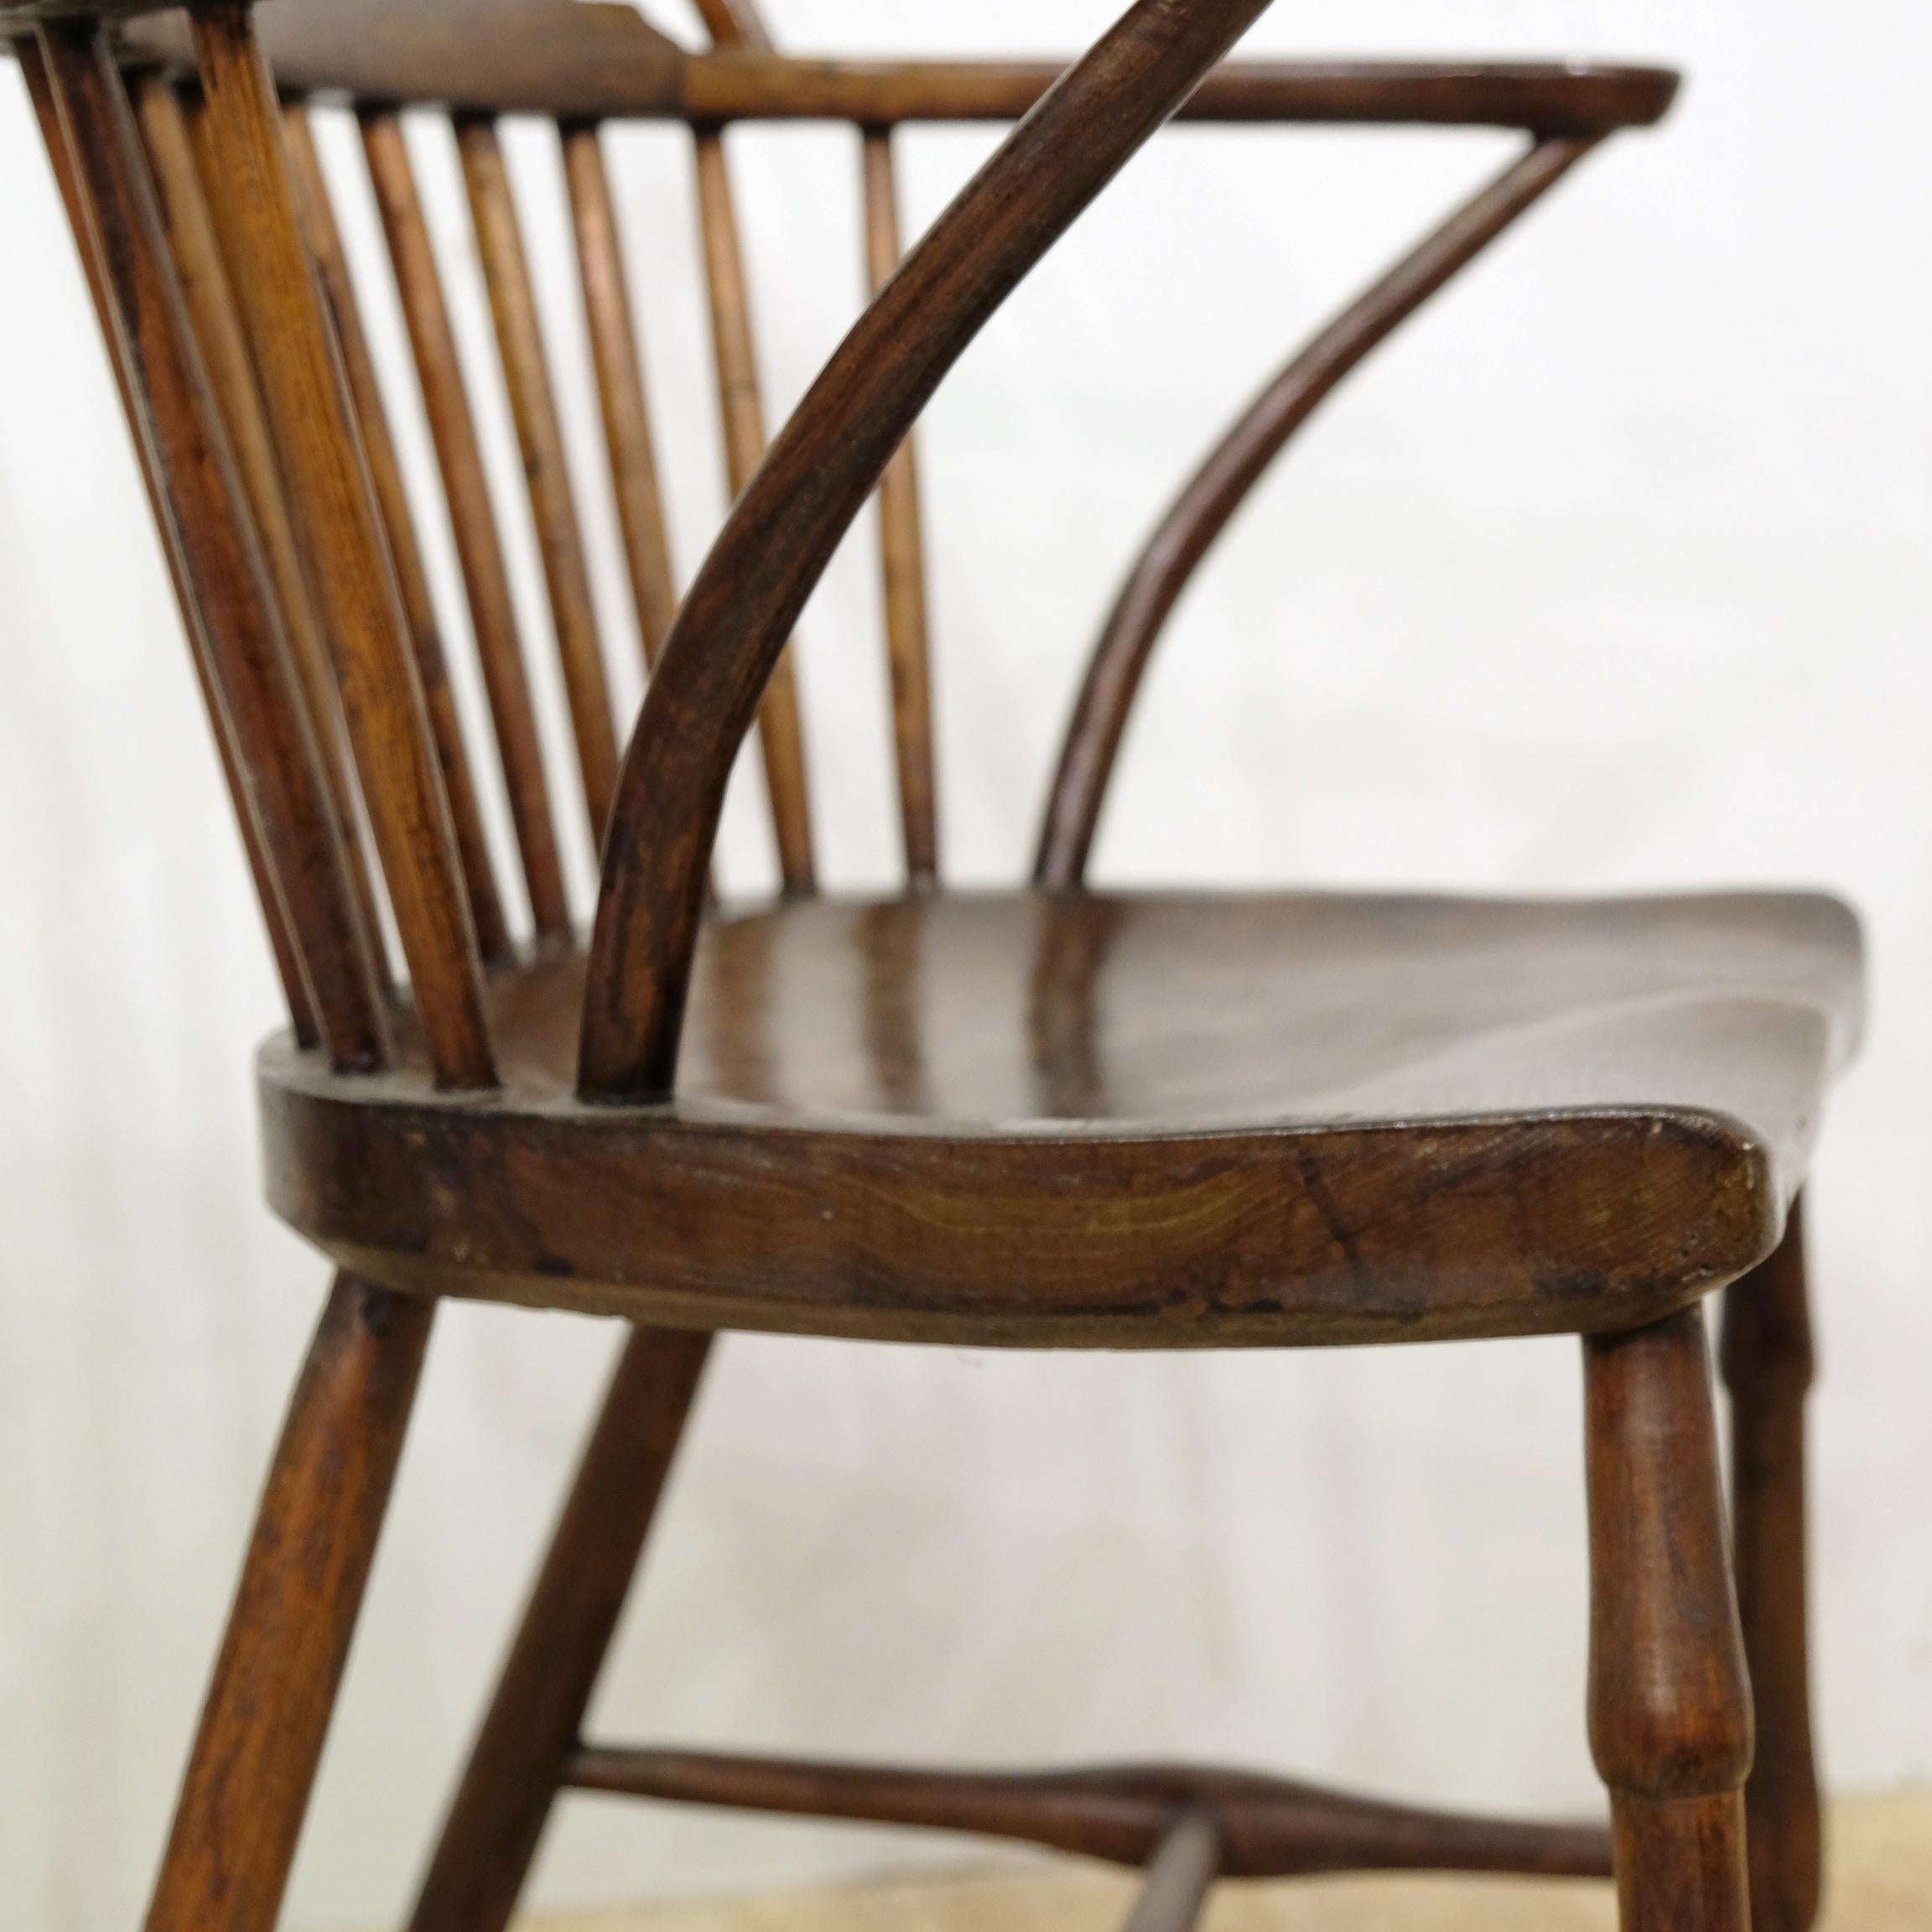 English West Country Mid-19th Century Stickback Windsor Chair 5